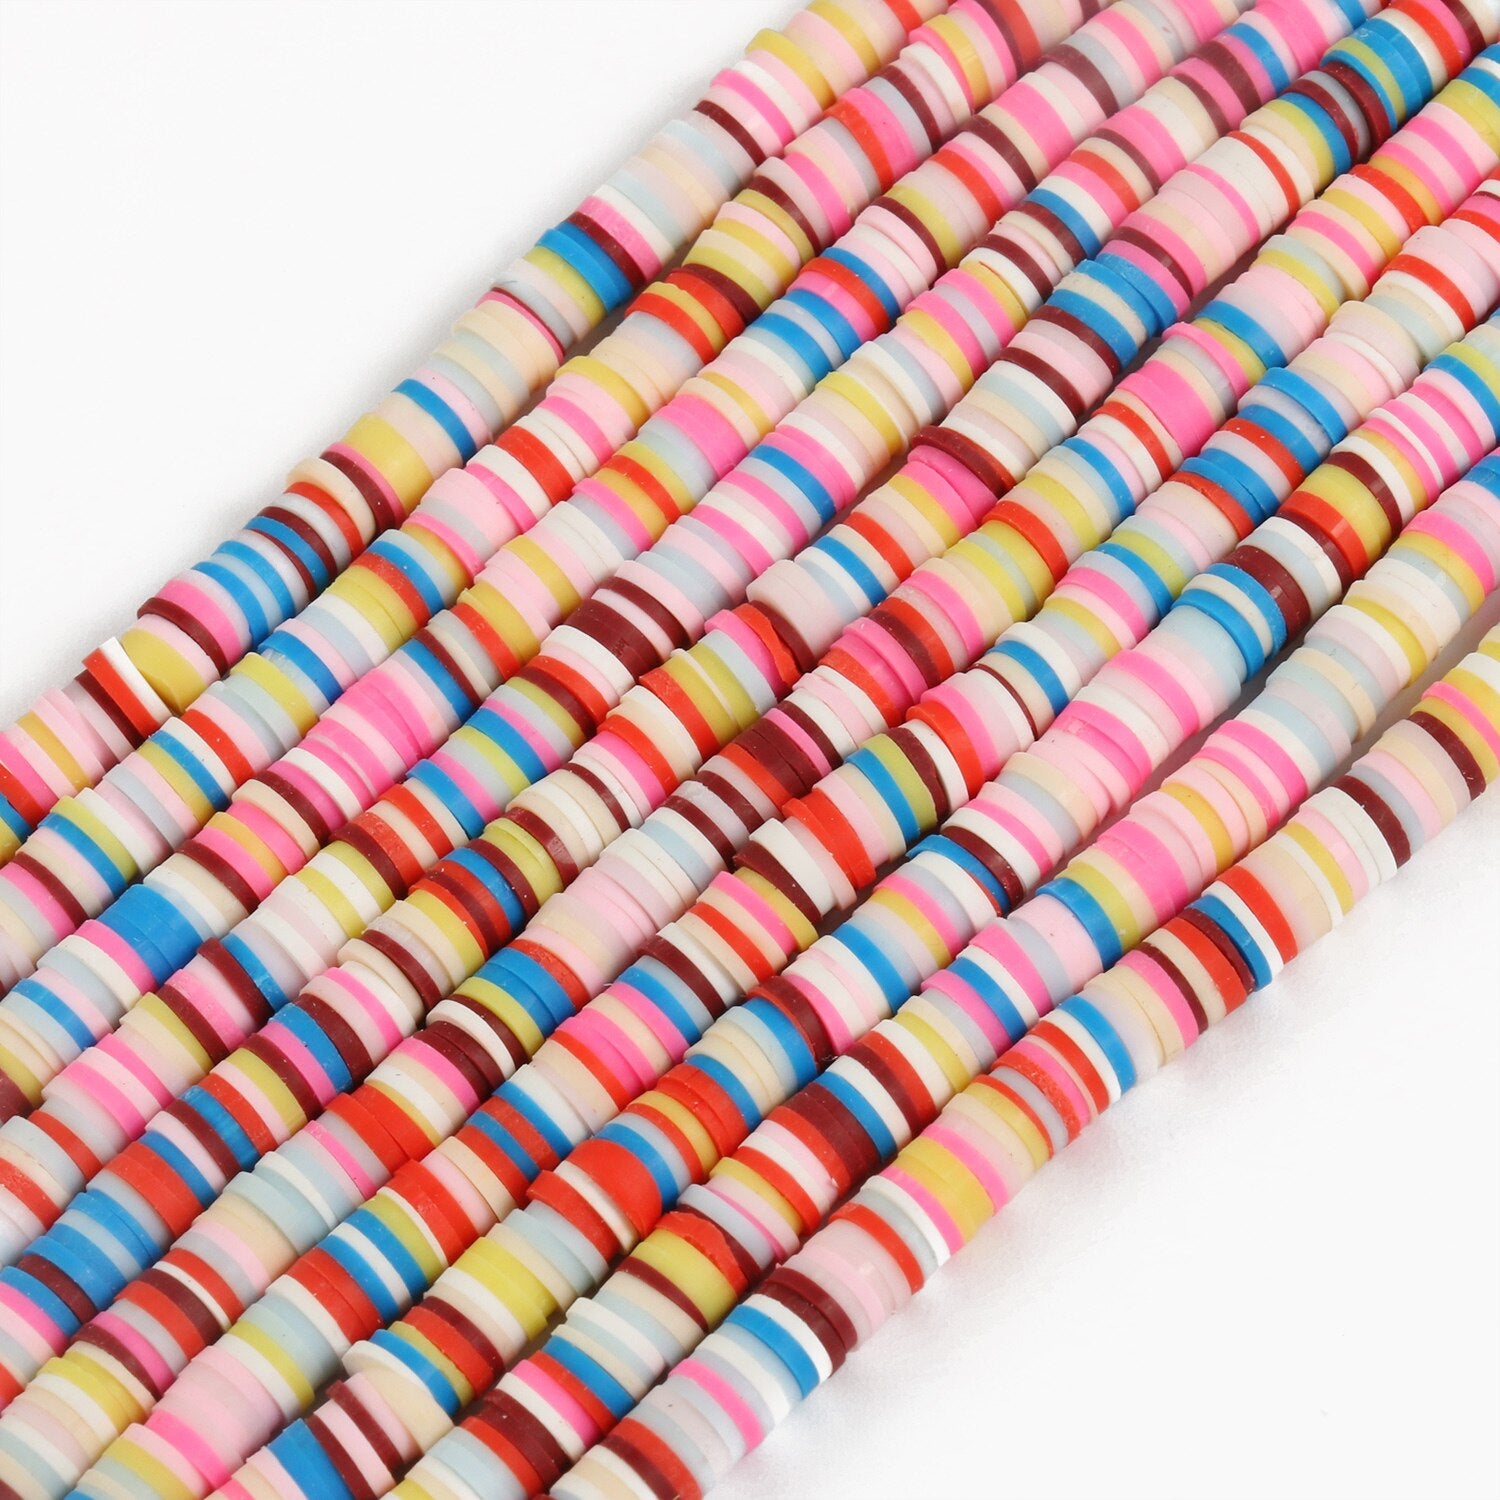 Get Creative with 300-320pcs of Boho African Disc Soft Clay Beads - Flexi Africa - Flexi Africa offers Free Delivery Worldwide - Vibrant African traditional clothing showcasing bold prints and intricate designs